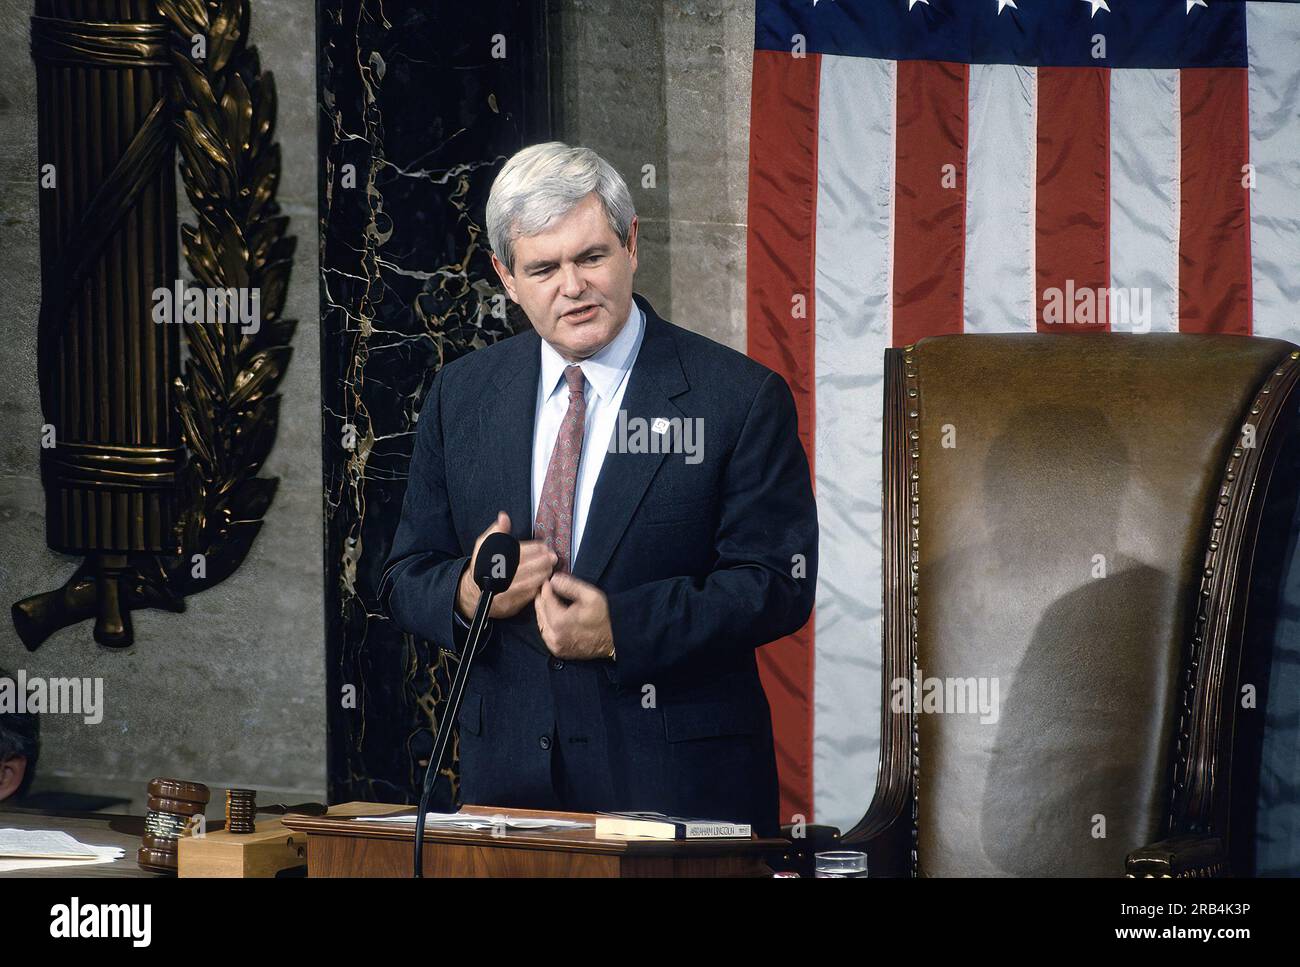 WASHINGTON DC - JANUARY 4, 1995 Speaker of the House Newt Gingrich stands at the speakers podium as he presides over opening day of the 104th Congress Stock Photo